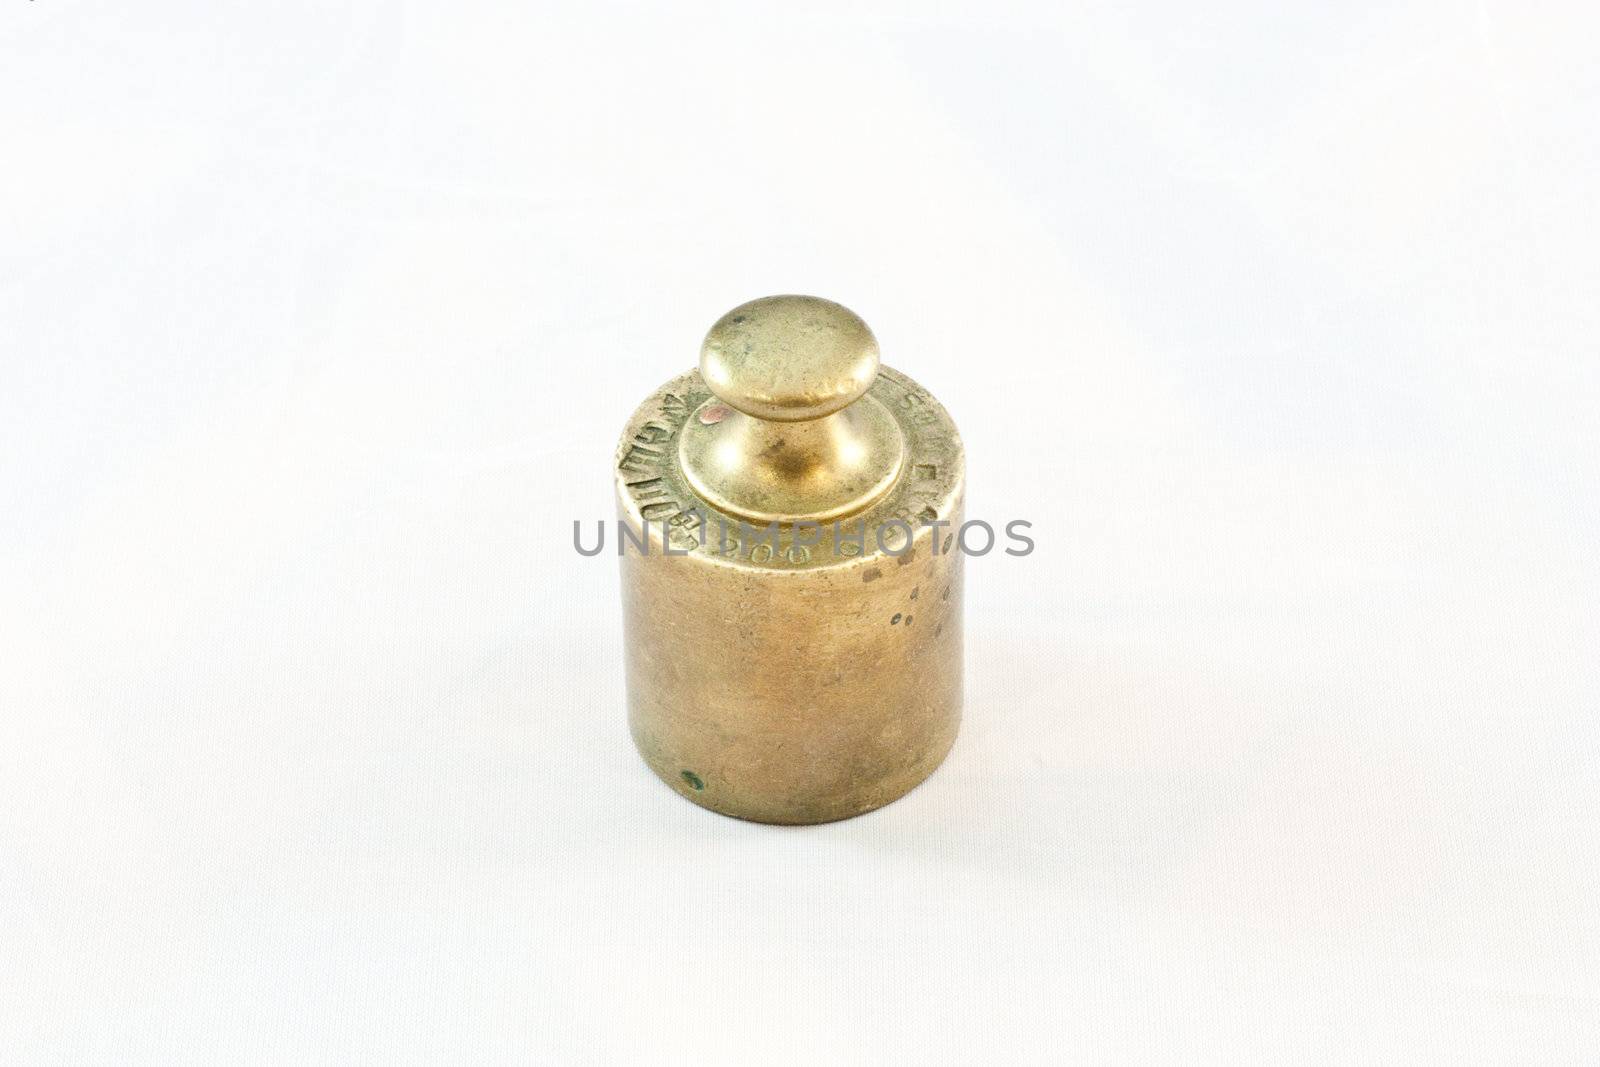 An antique iron weight on white background, useful for conceptual